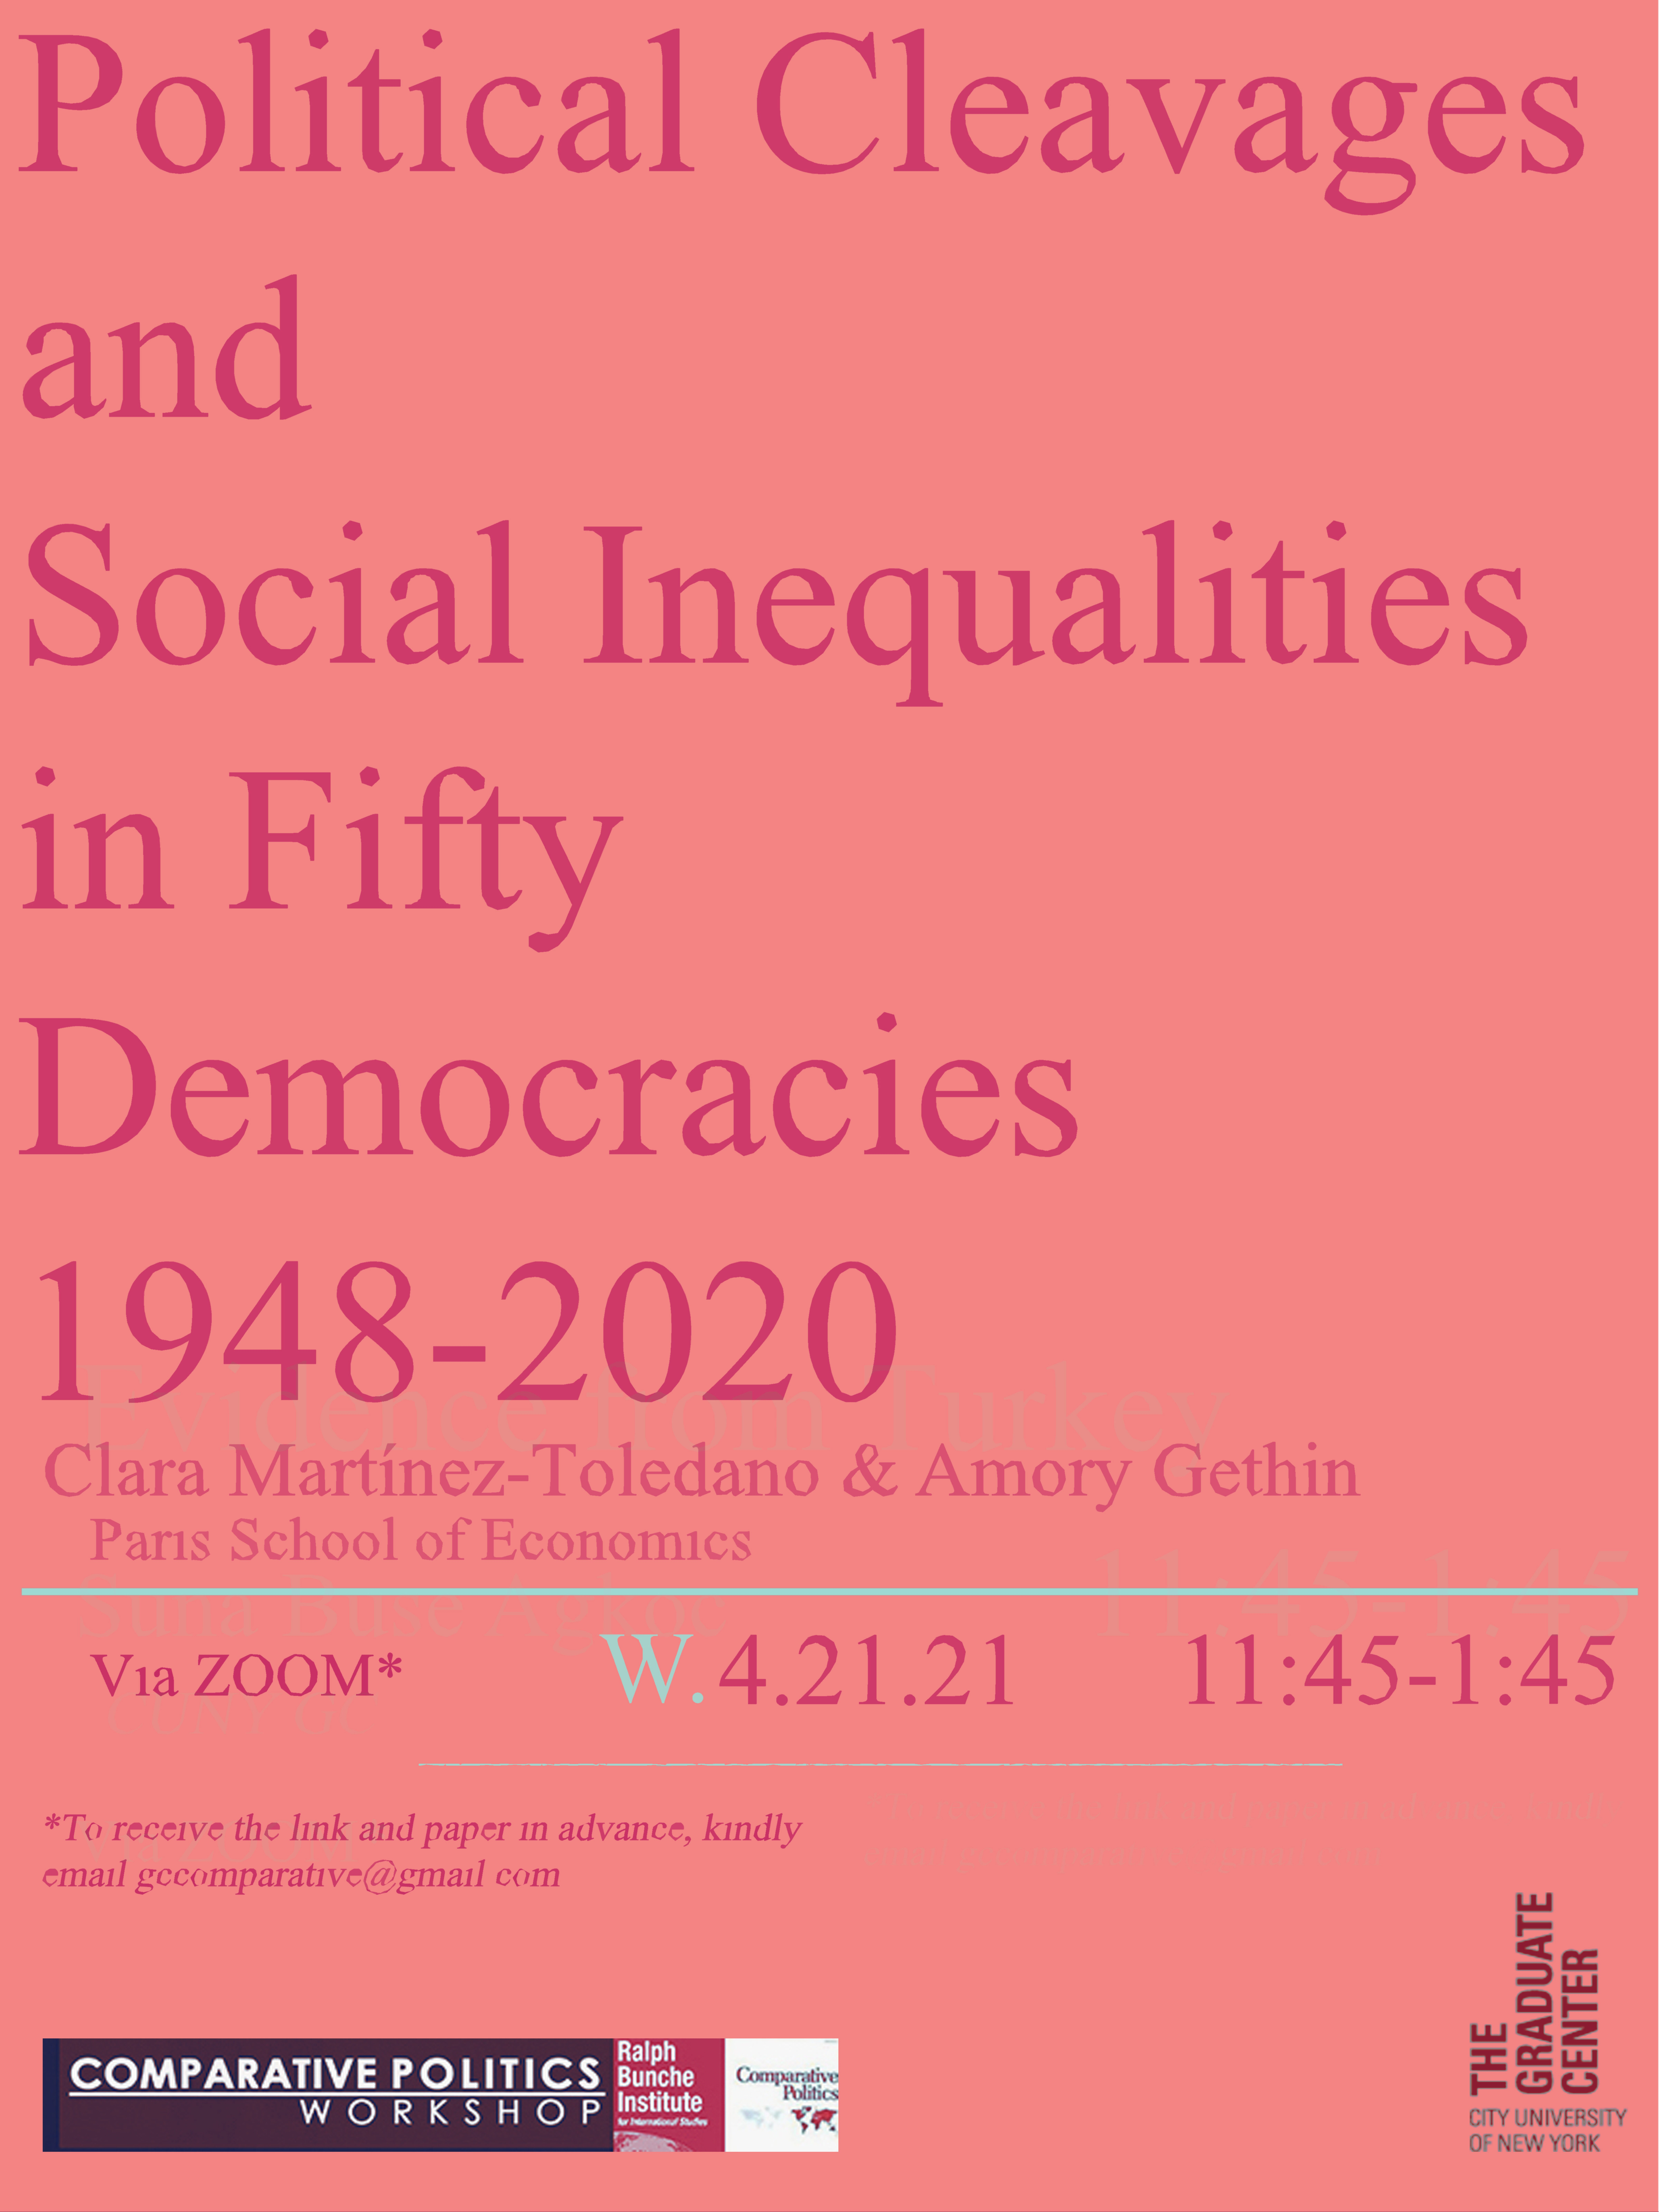 Comparative Politics Workshop: Clara Martínez-Toledano and Amory Gethin, "Political Cleavages and Social Inequalities in Fifty Democracies 1948-2020," Wednesday, April 21, 11:45am-1:45pm